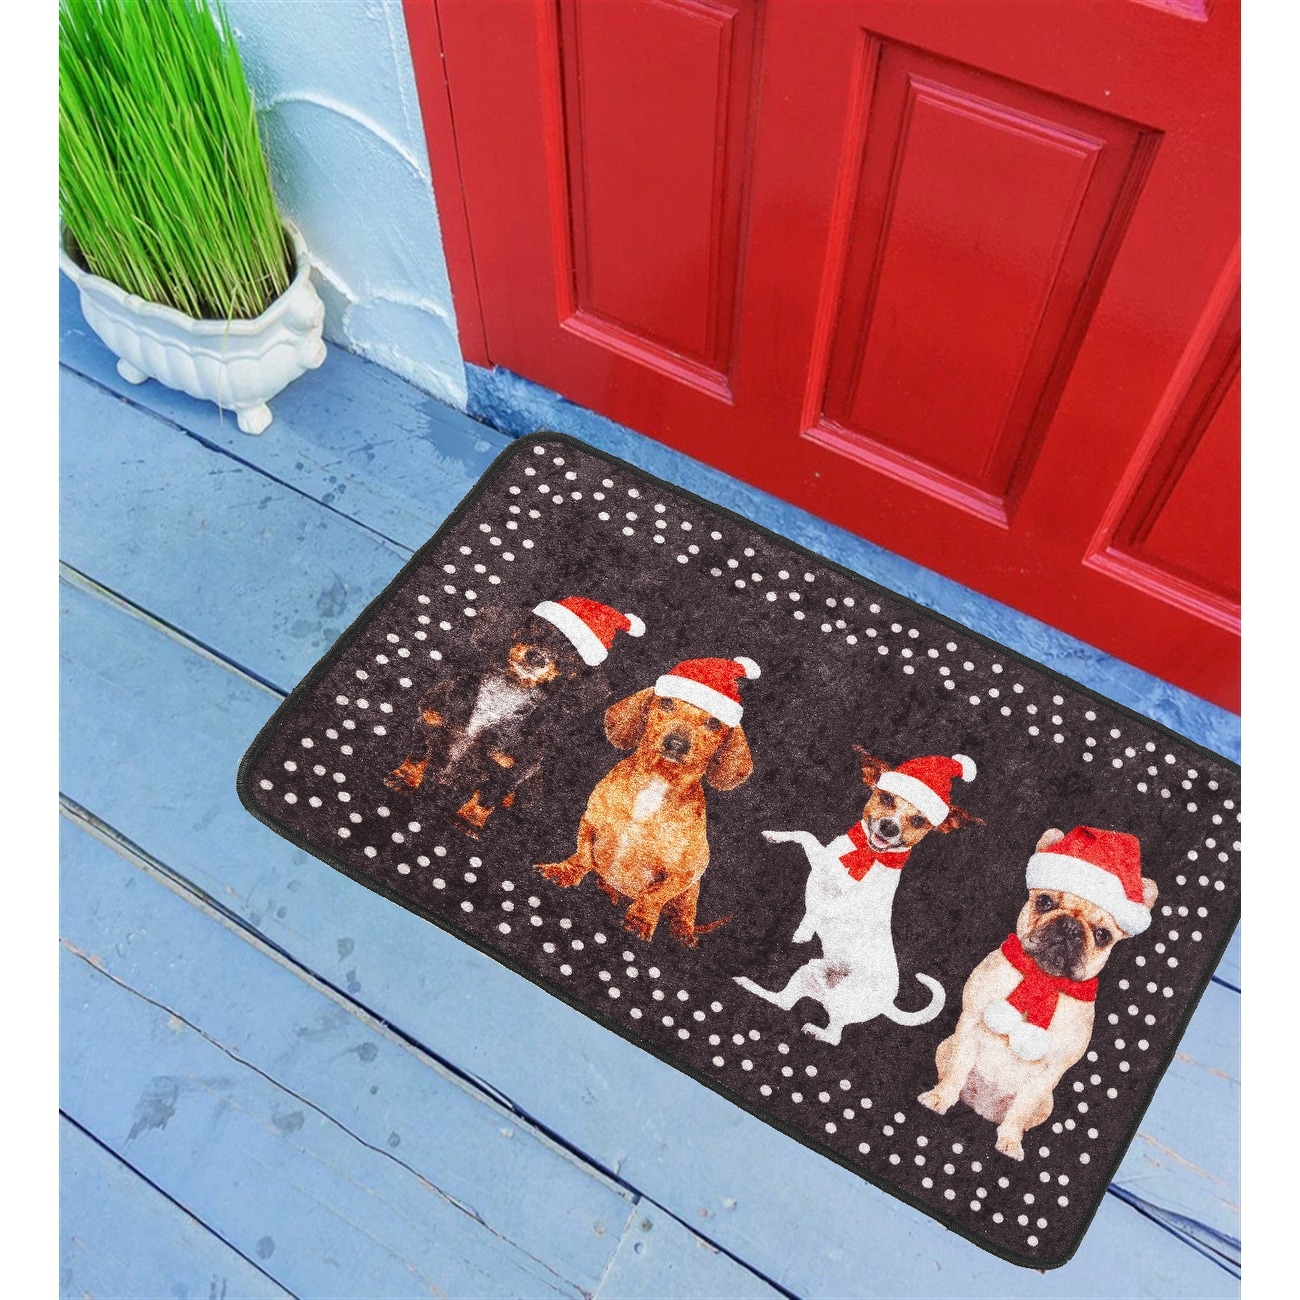 https://ak1.ostkcdn.com/images/products/is/images/direct/e7a975de3d3b2f1afb512ea3a5a0306a76c66789/Winter-Floor-Mat%2C-30x20.jpg